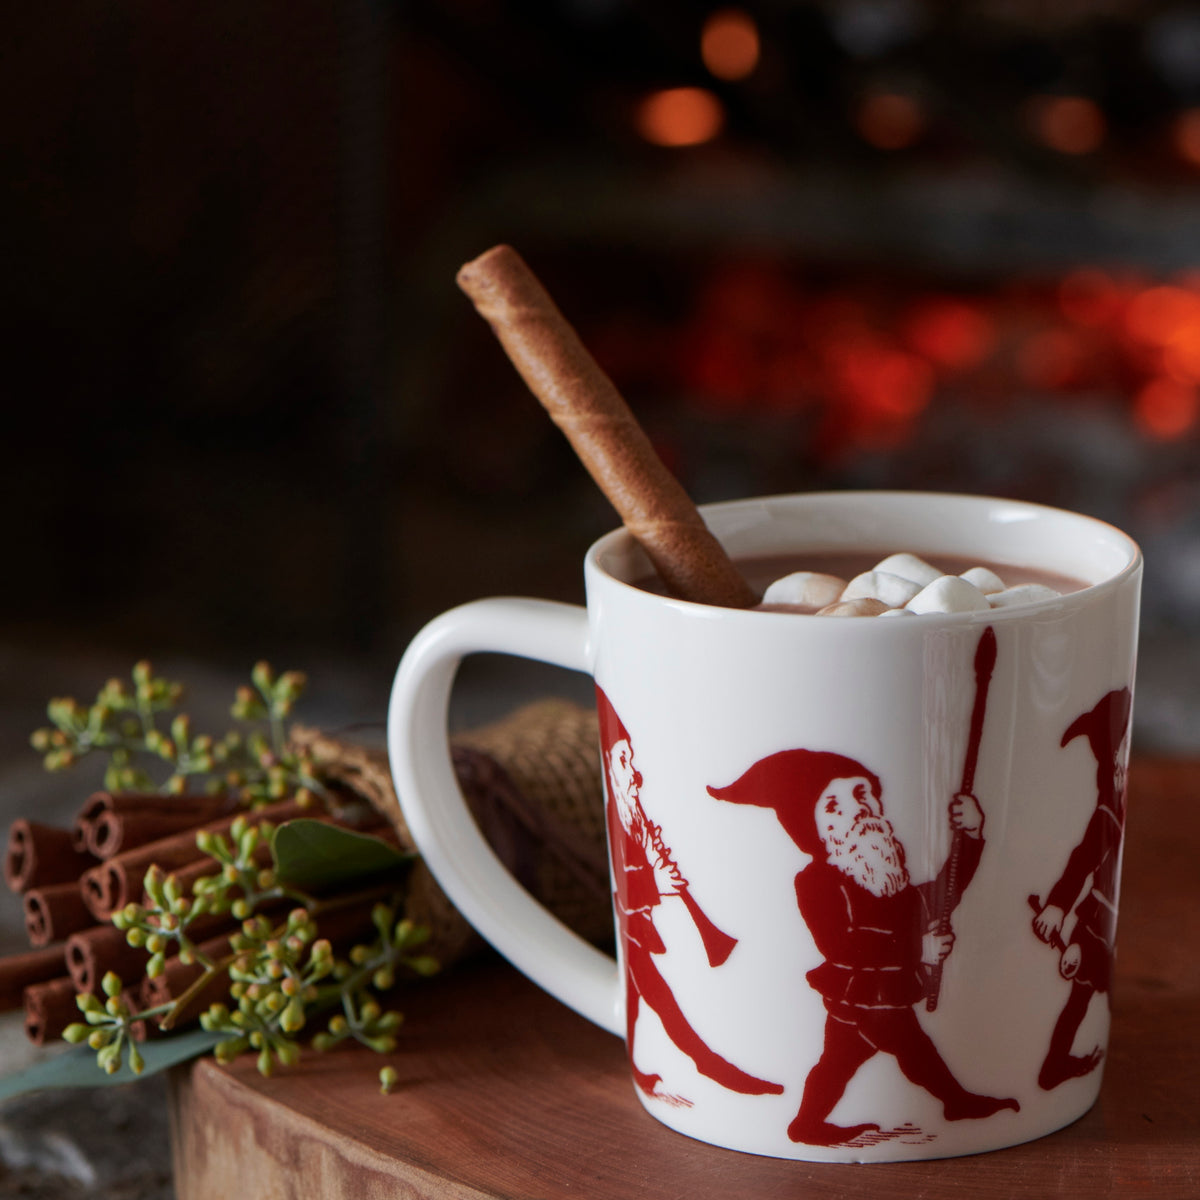 An Elves Mug from Caskata Artisanal Home with red illustrations of playful elves filled with hot chocolate and marshmallows, featuring a chocolate wafer stick inside. A bunch of cinnamon sticks and greenery rest beside the mug, perfect for your holiday collection.